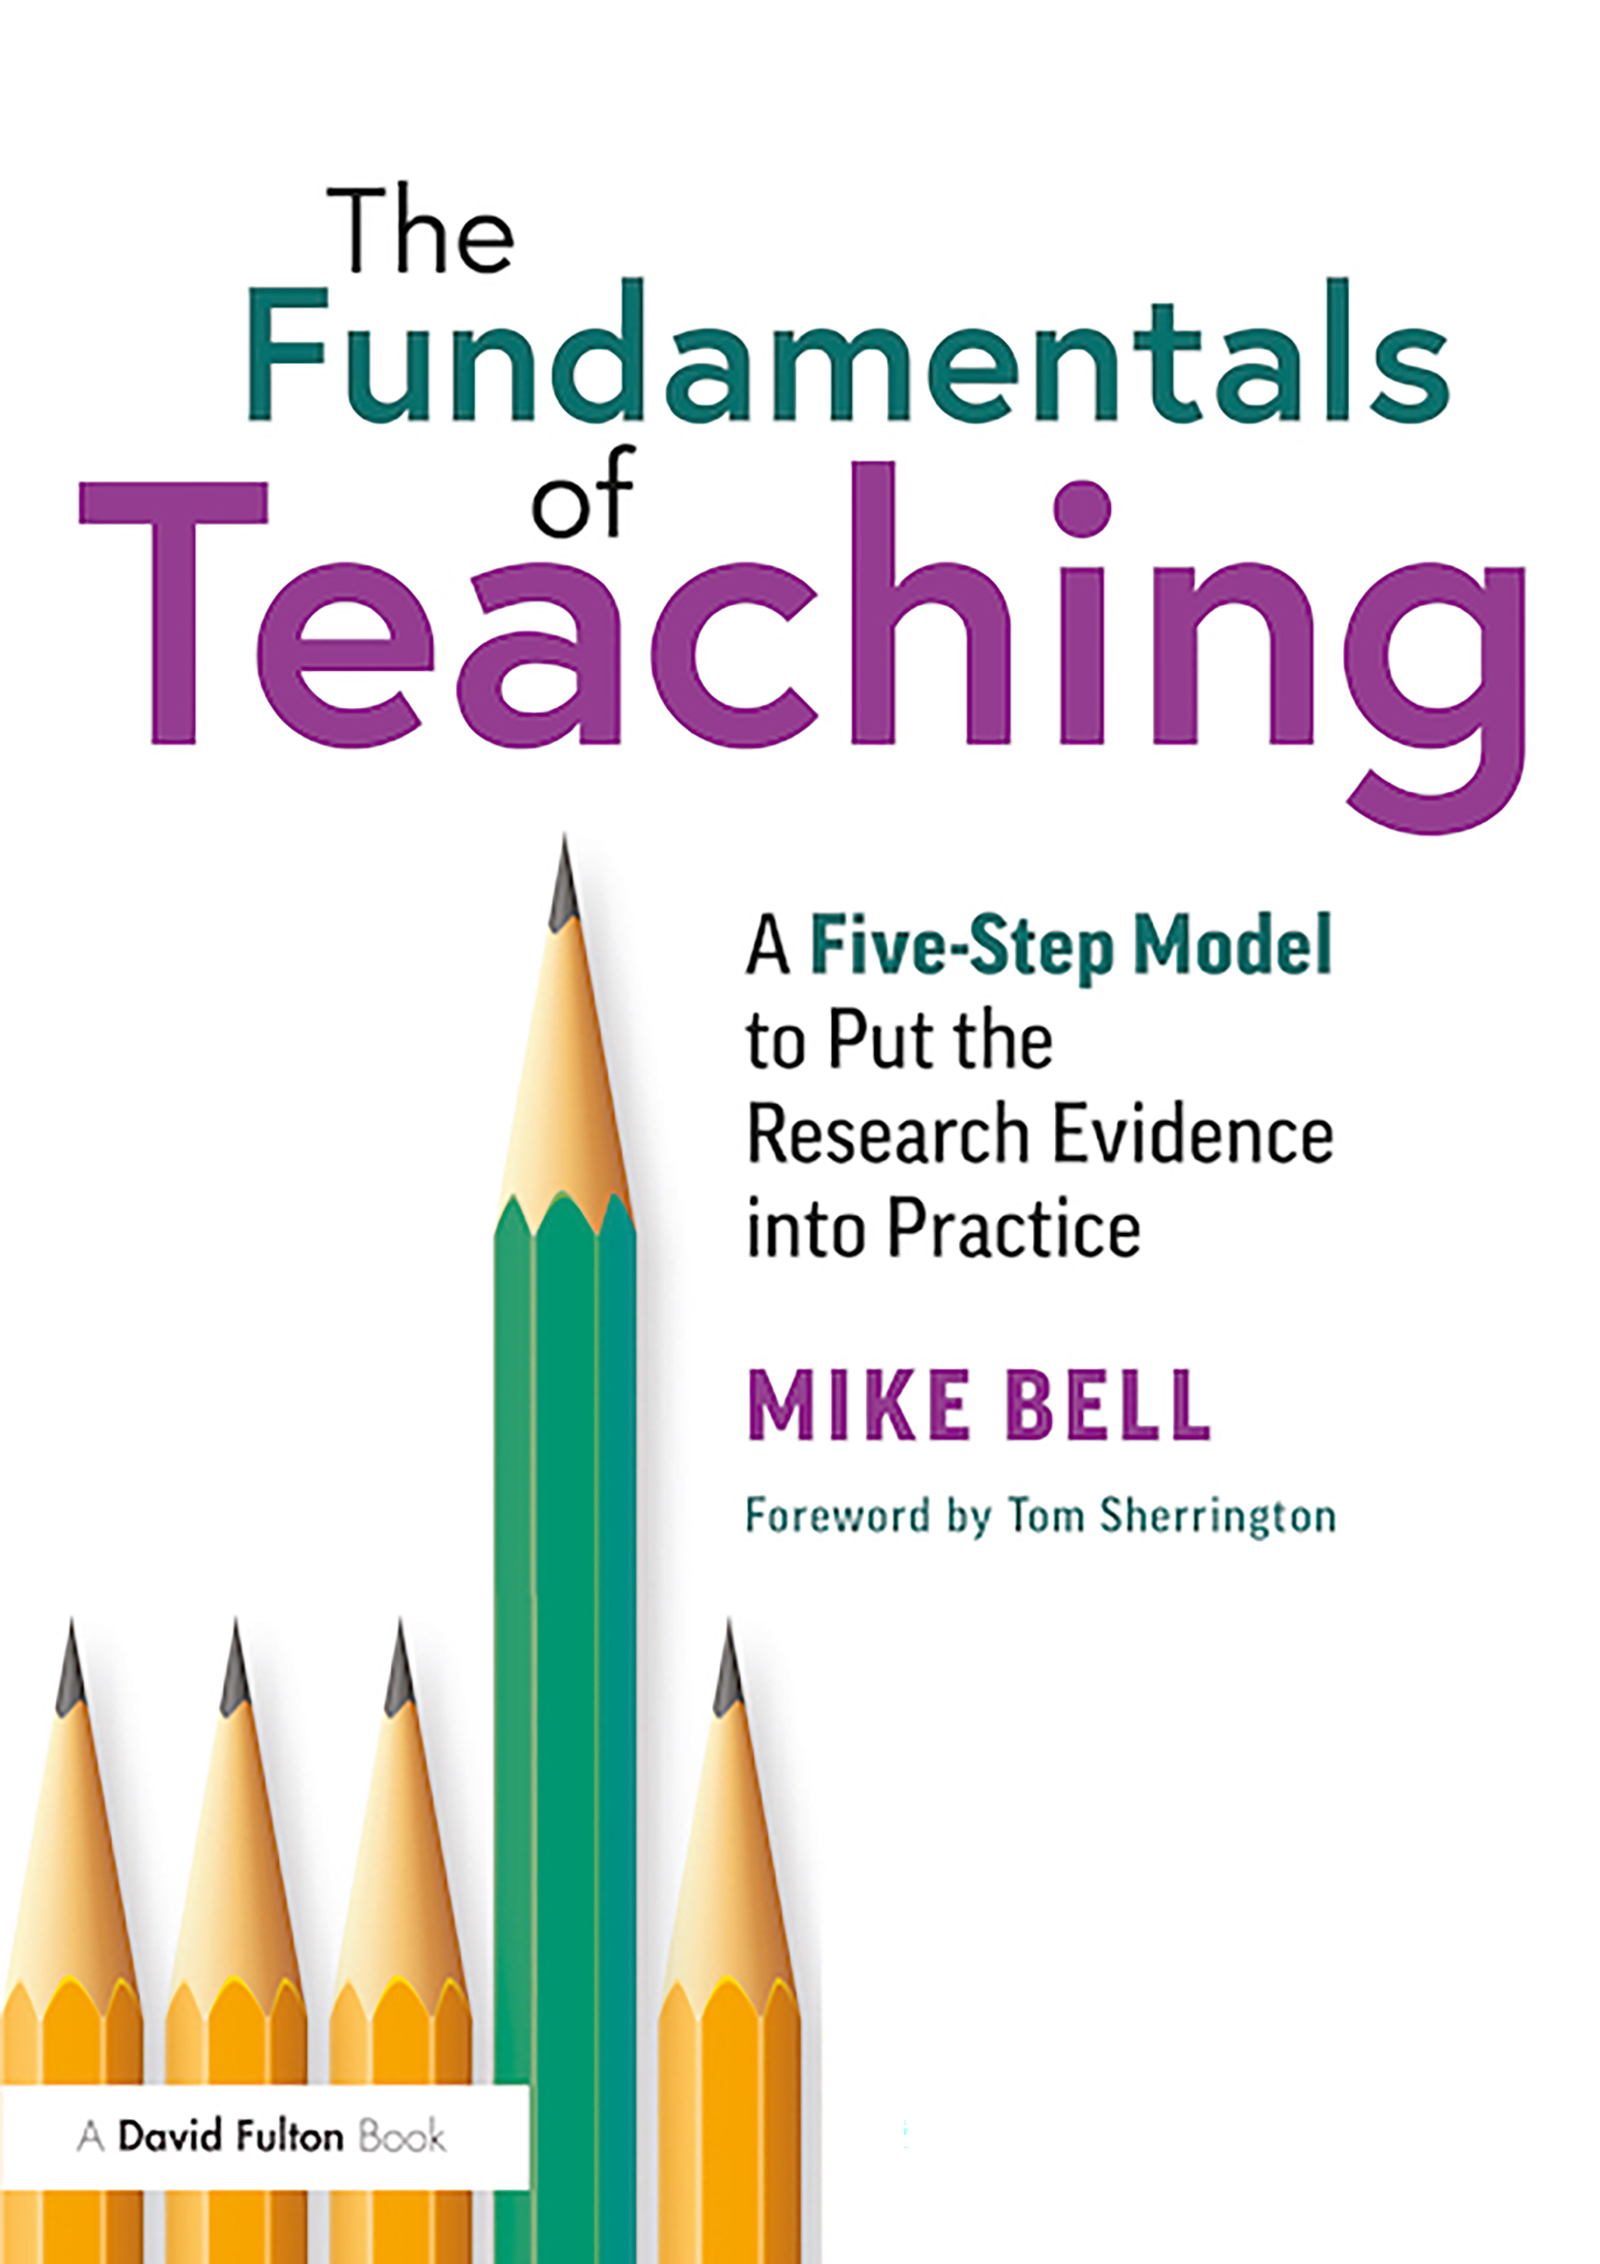 The Fundamentals of Teaching